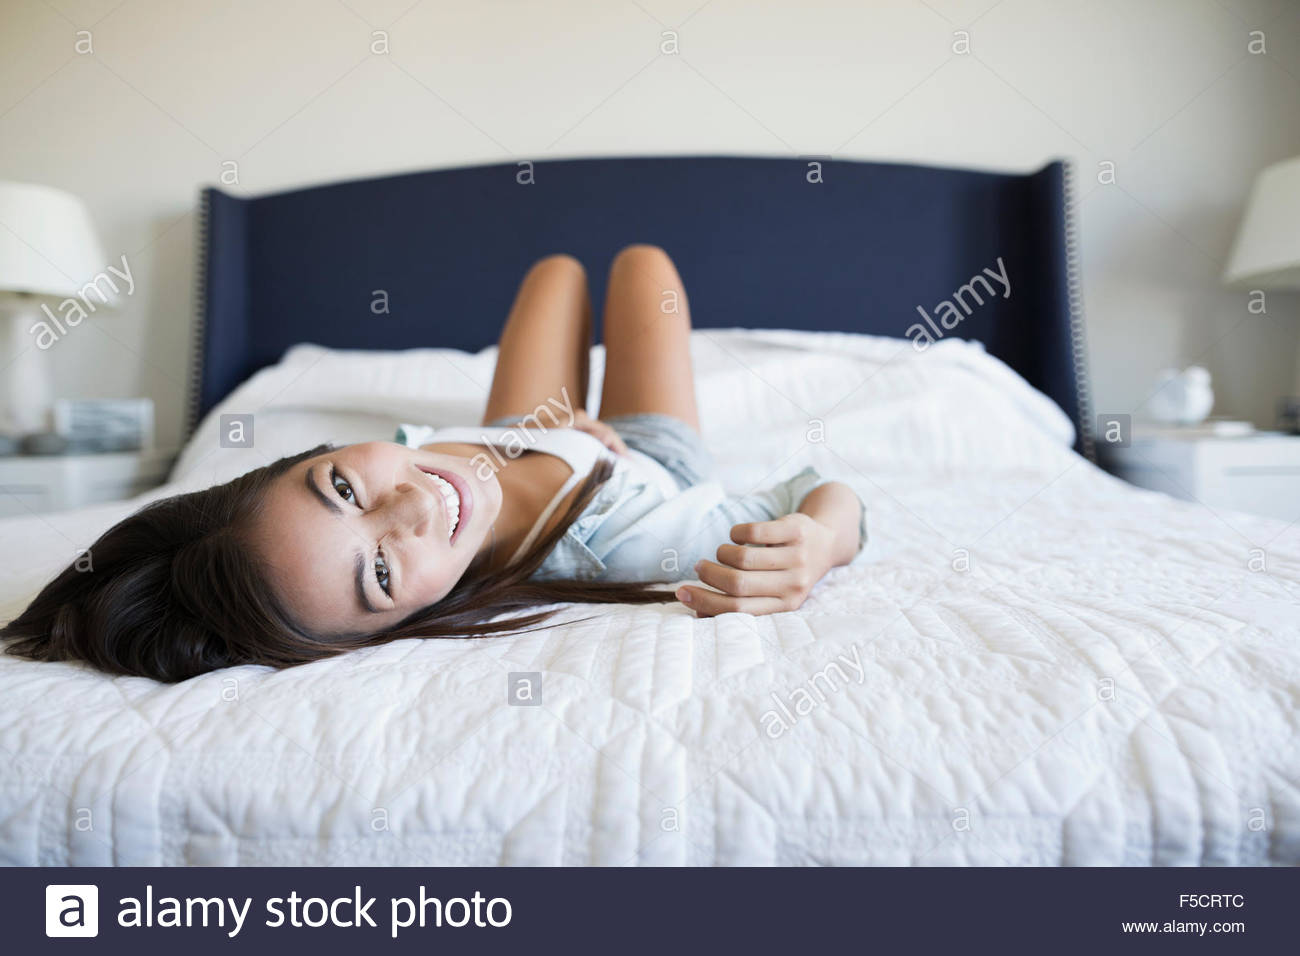 Portrait smiling young woman laying on bed Stock Photo